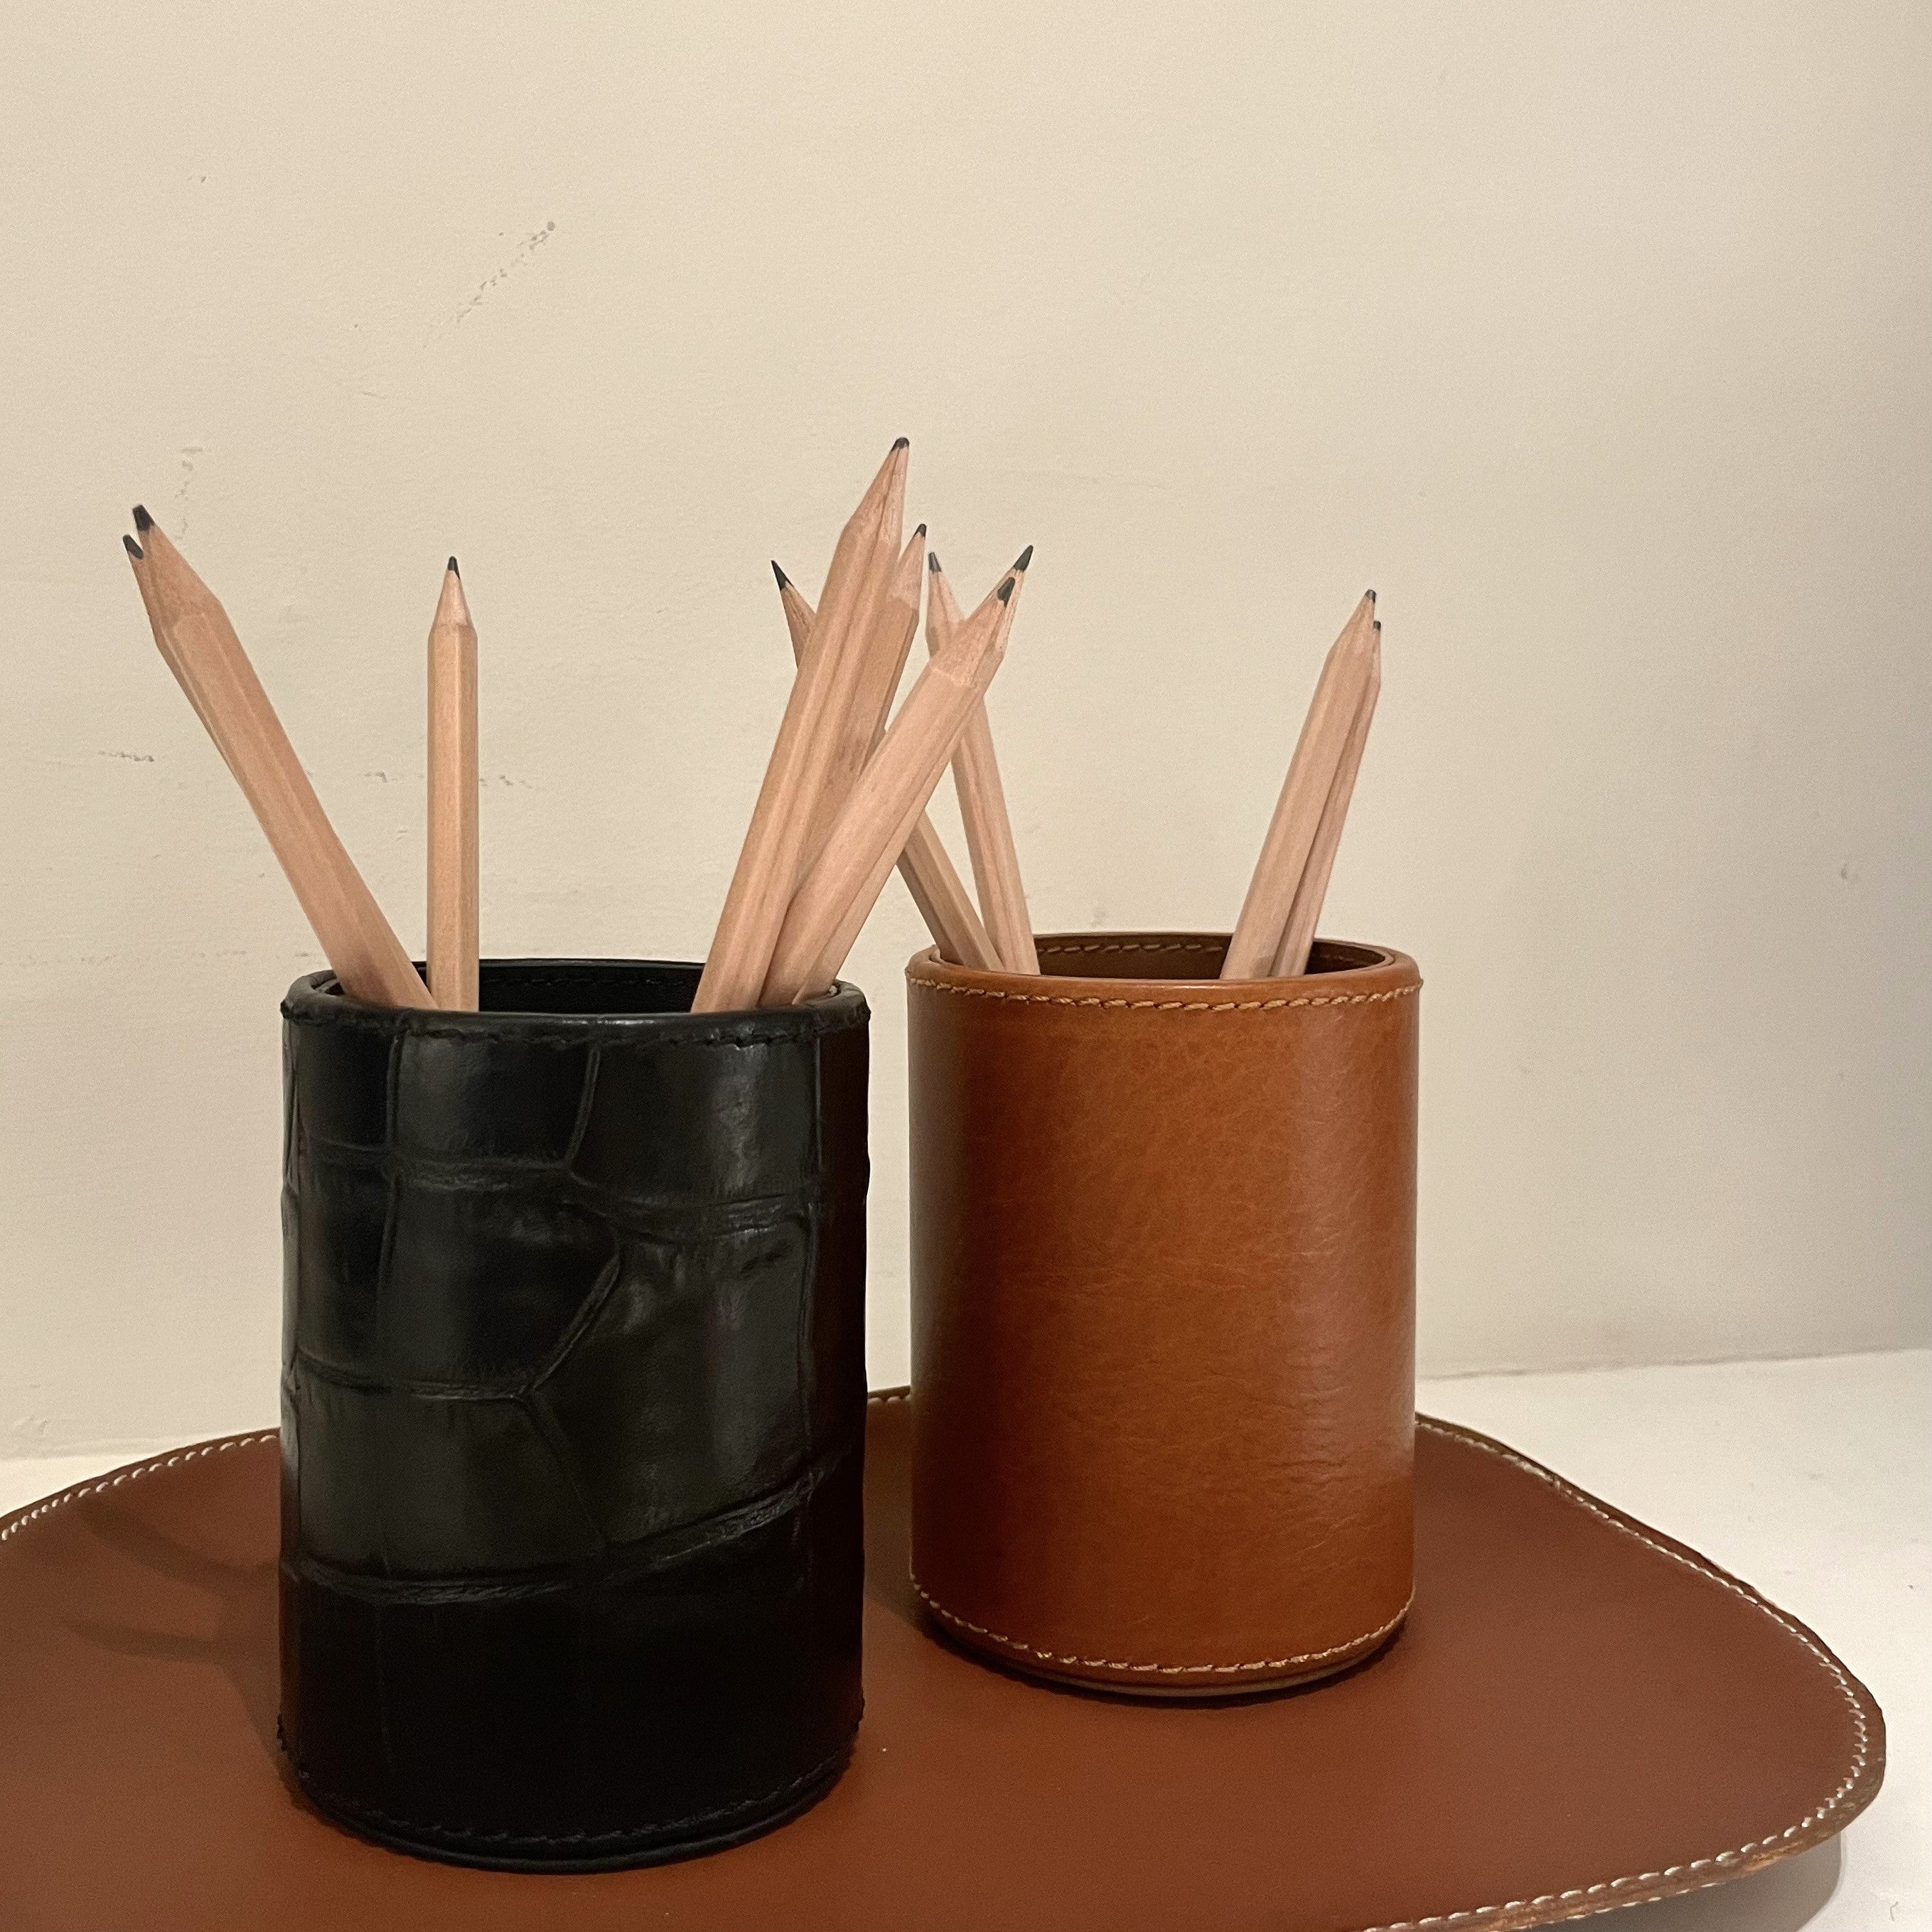 Leather Pen Cup, Tan